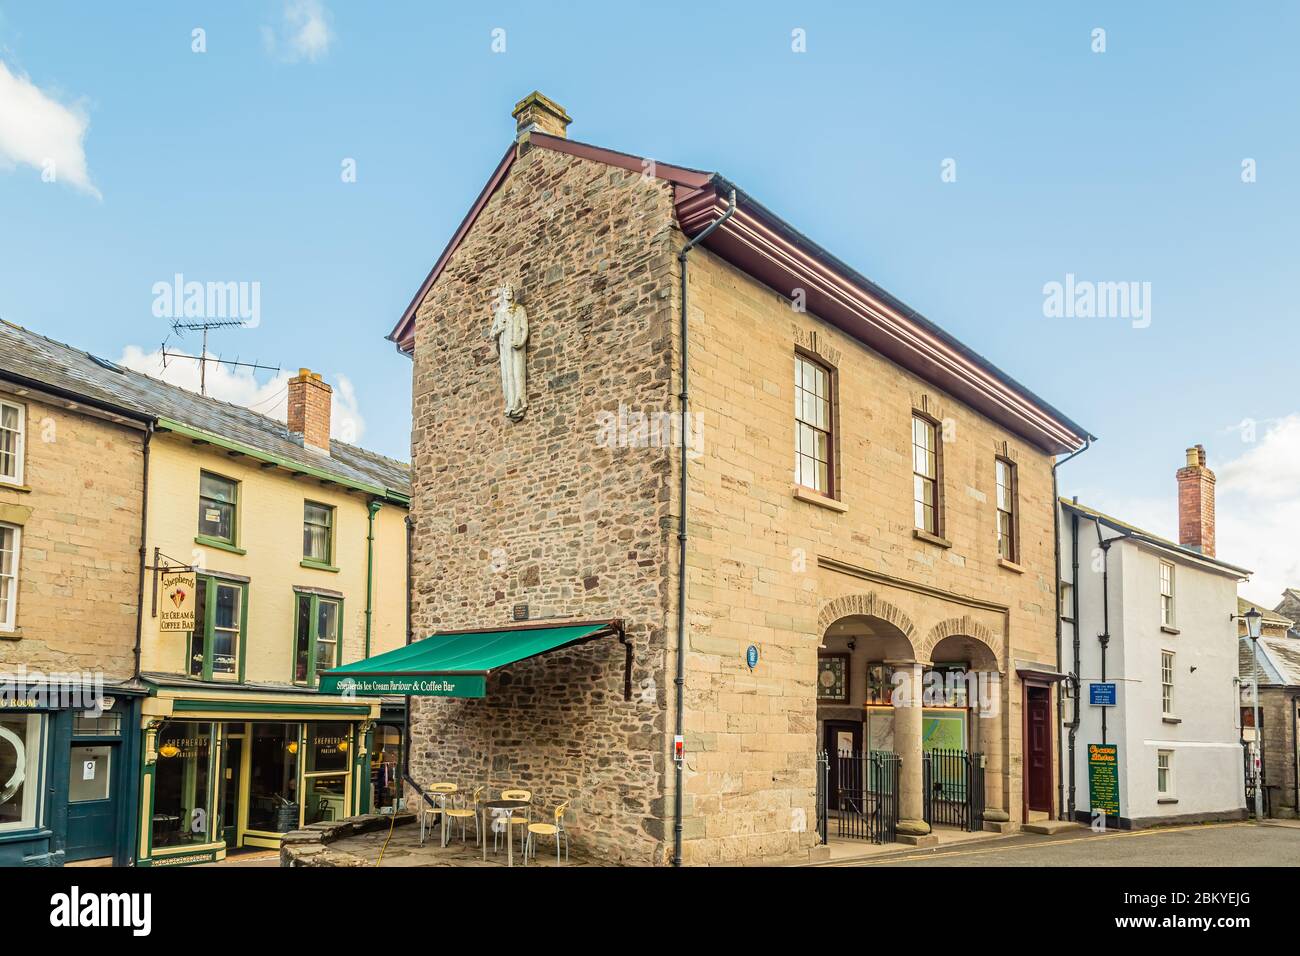 Haye-on-Wye, UK, April 2, 2019: The Town Hall dating from 1840. It is on the site of the original hall built in the reign of James !. The statue on th Stock Photo